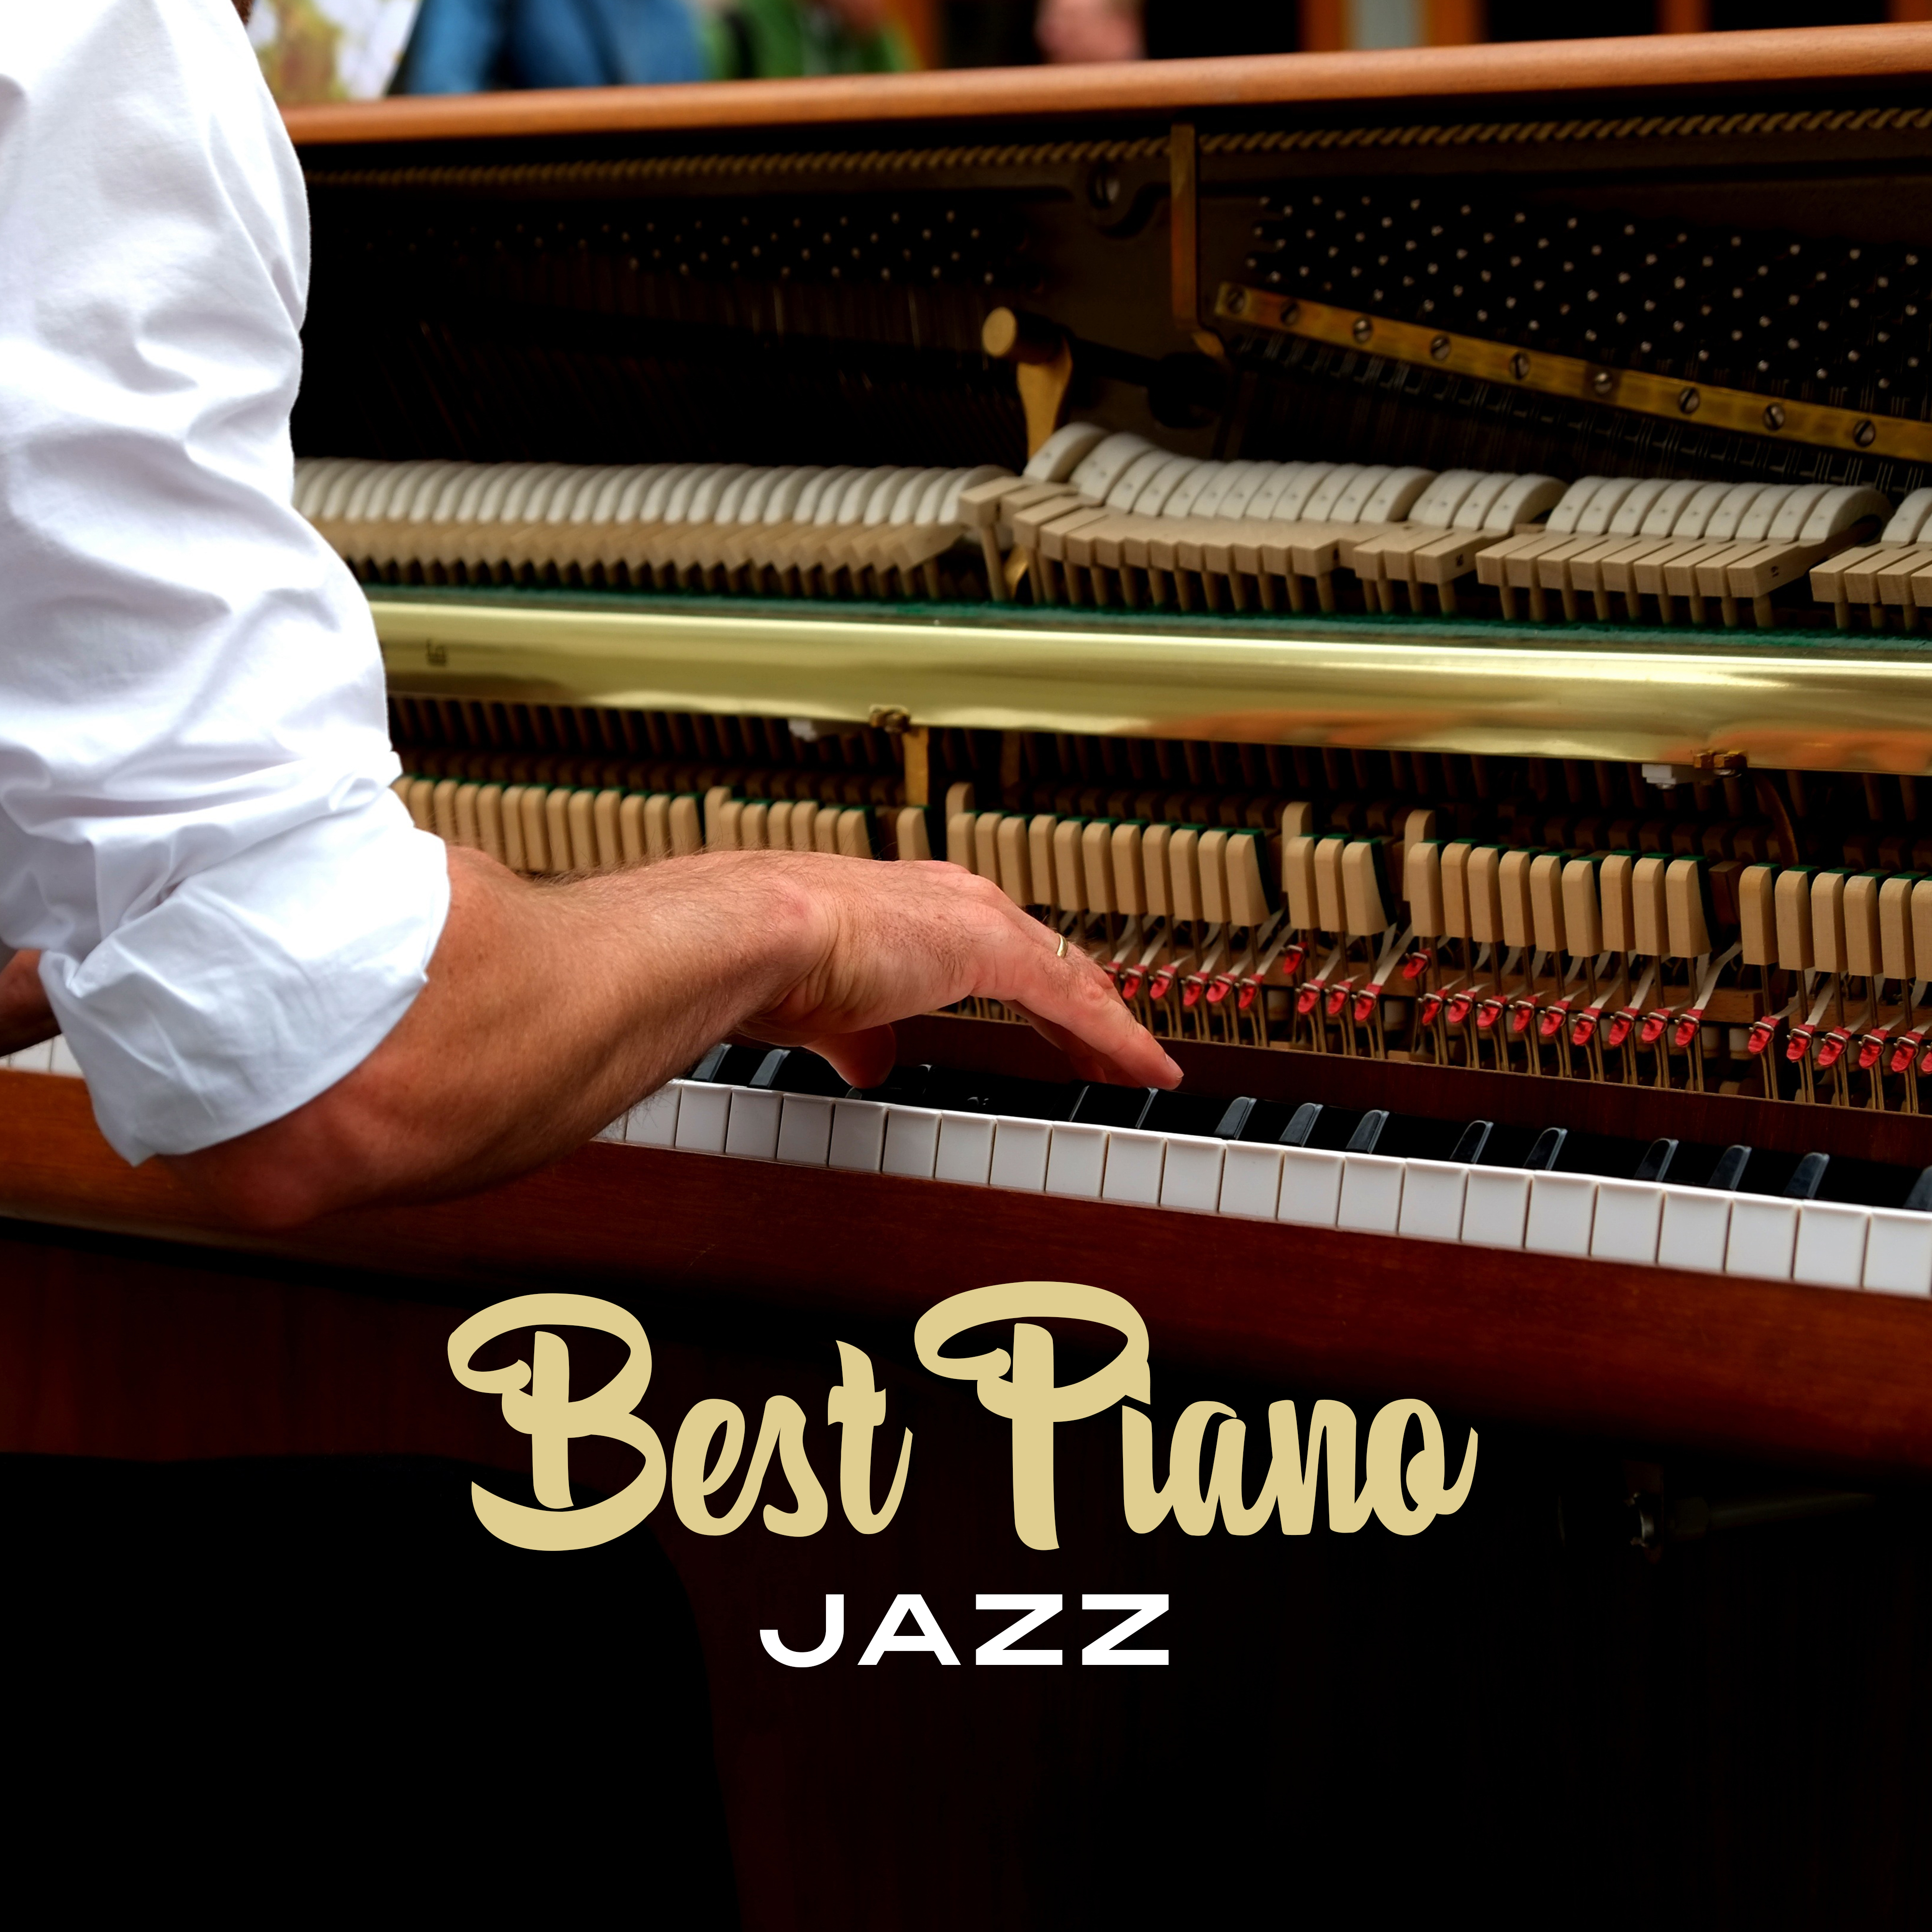 Best Piano Jazz  Sad Piano Songs, Melancholy Jazz, Calming Music to Relax, Peaceful Piano Music